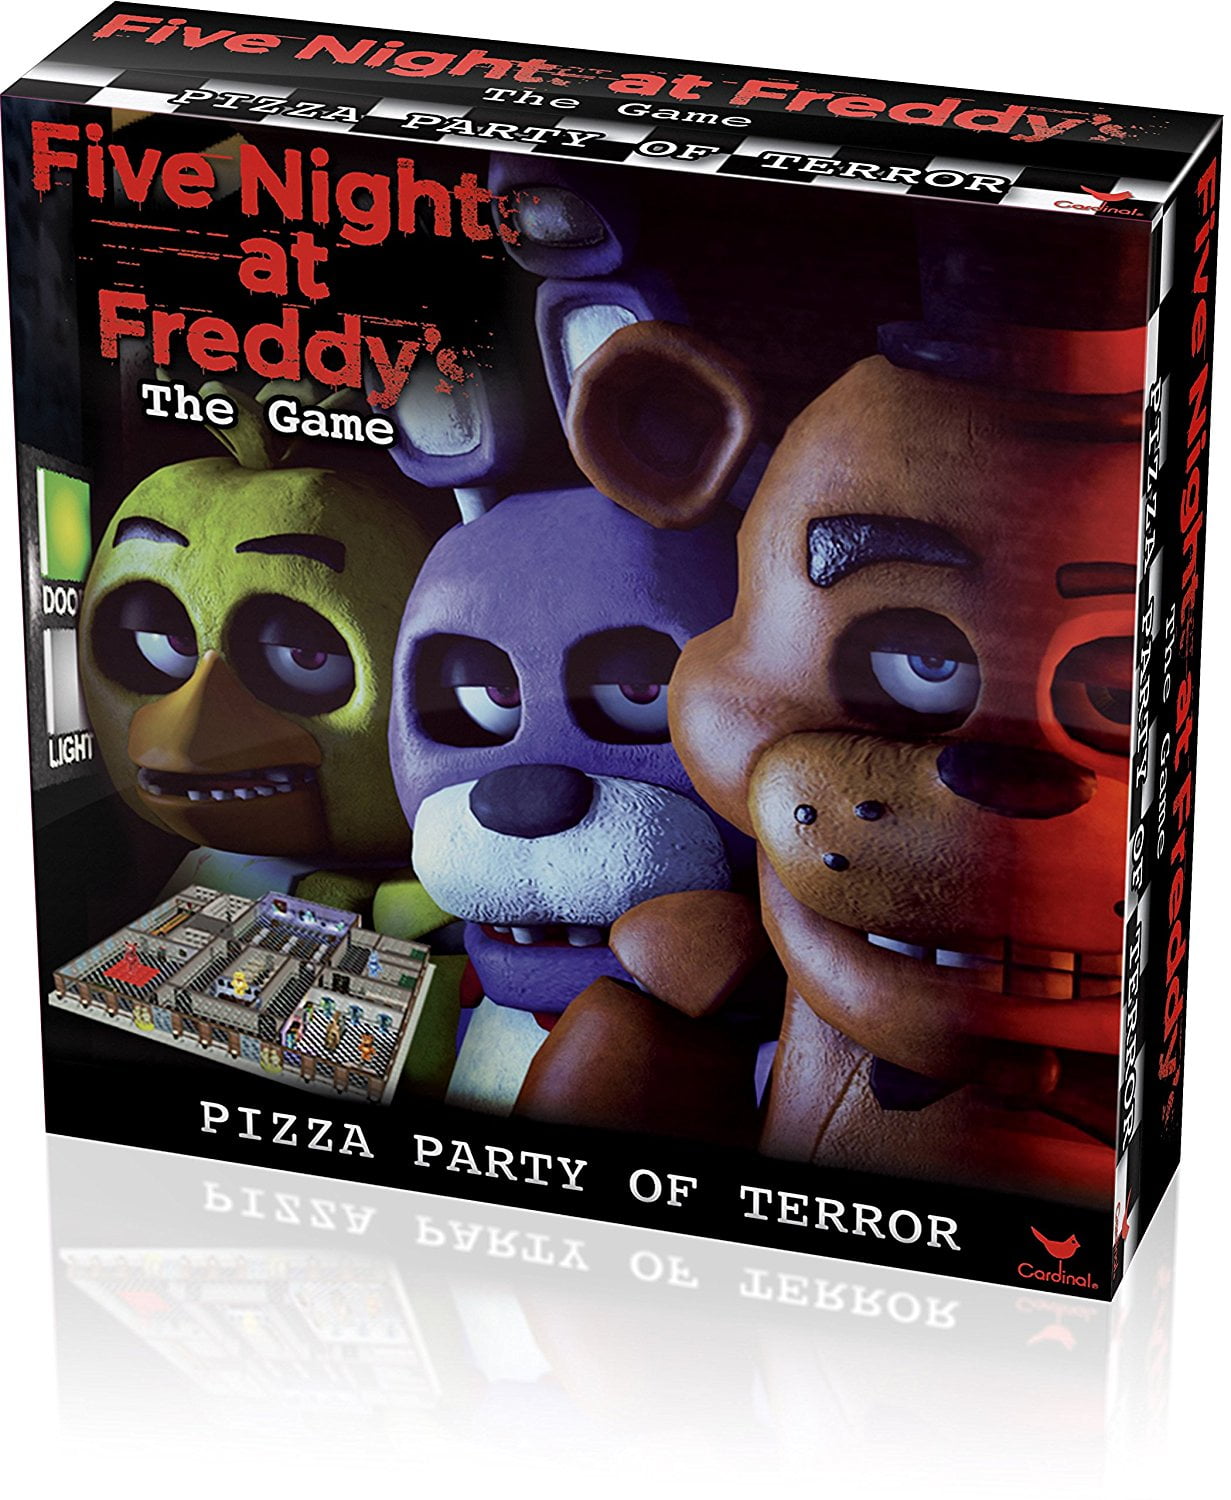 Five Nights At Freddy's Foxy Men's Costume : Target